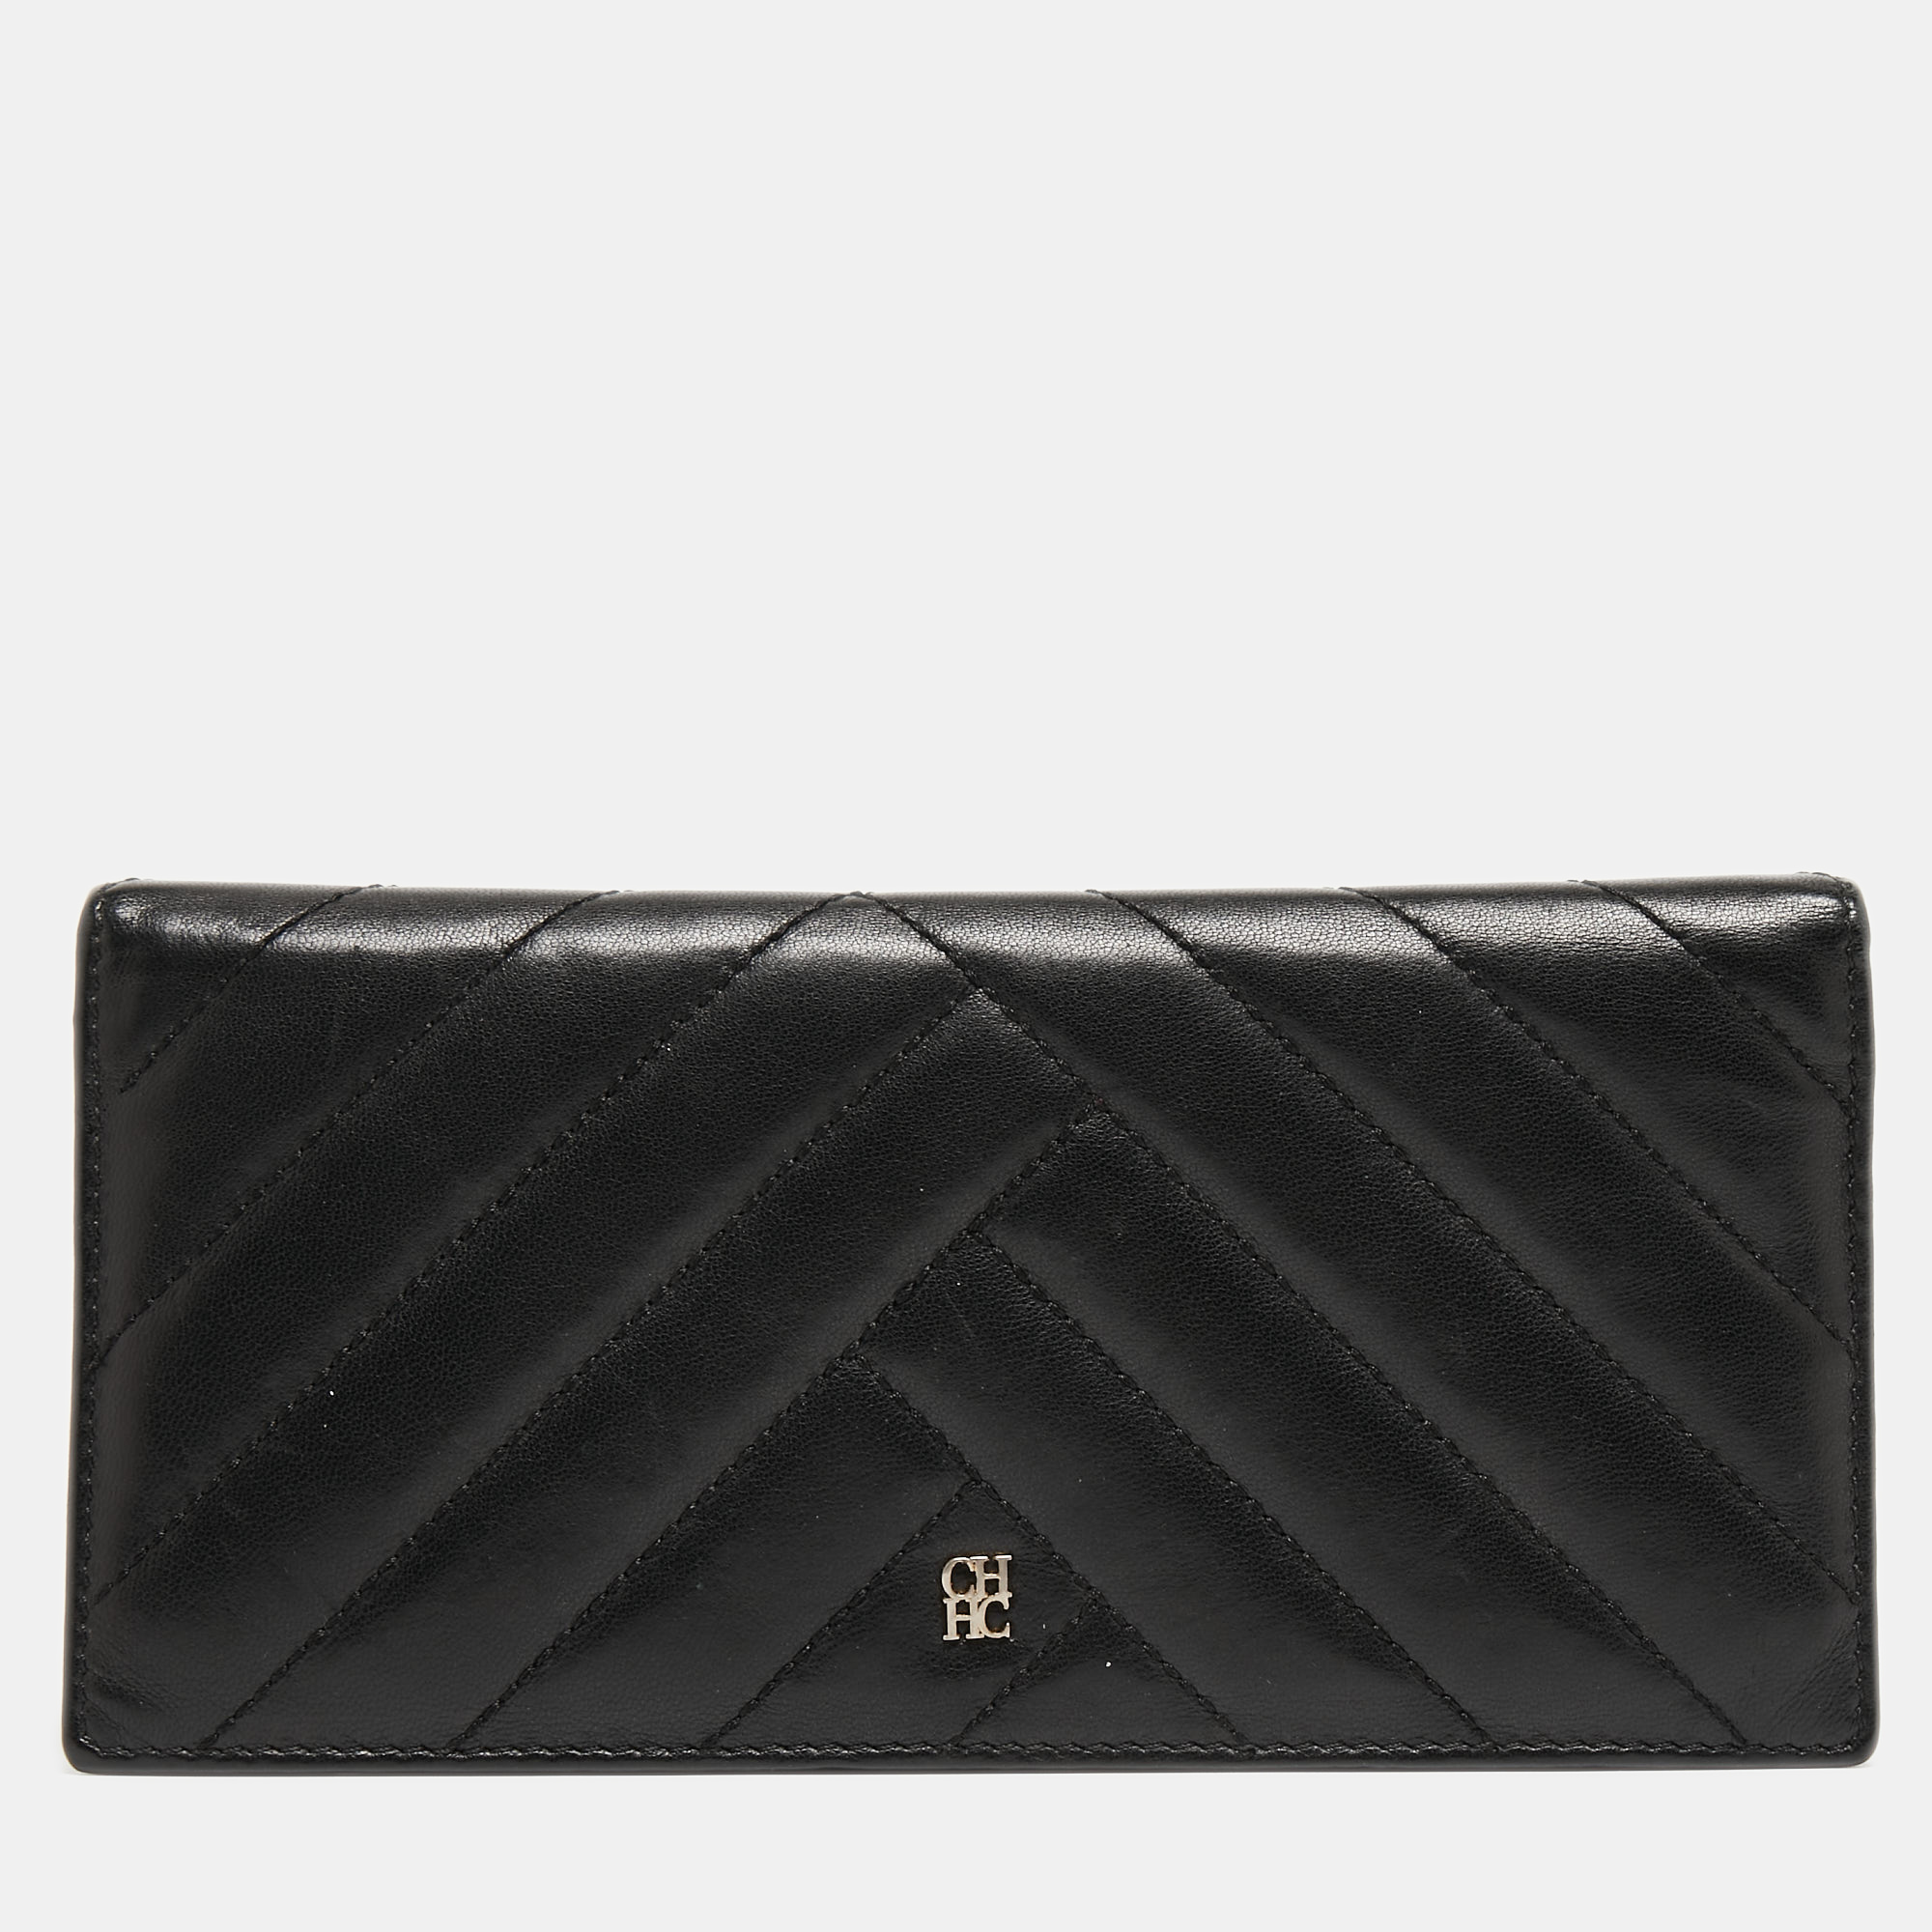 Pre-owned Carolina Herrera Black Chevron Quilted Leather Bifold Continental Wallet